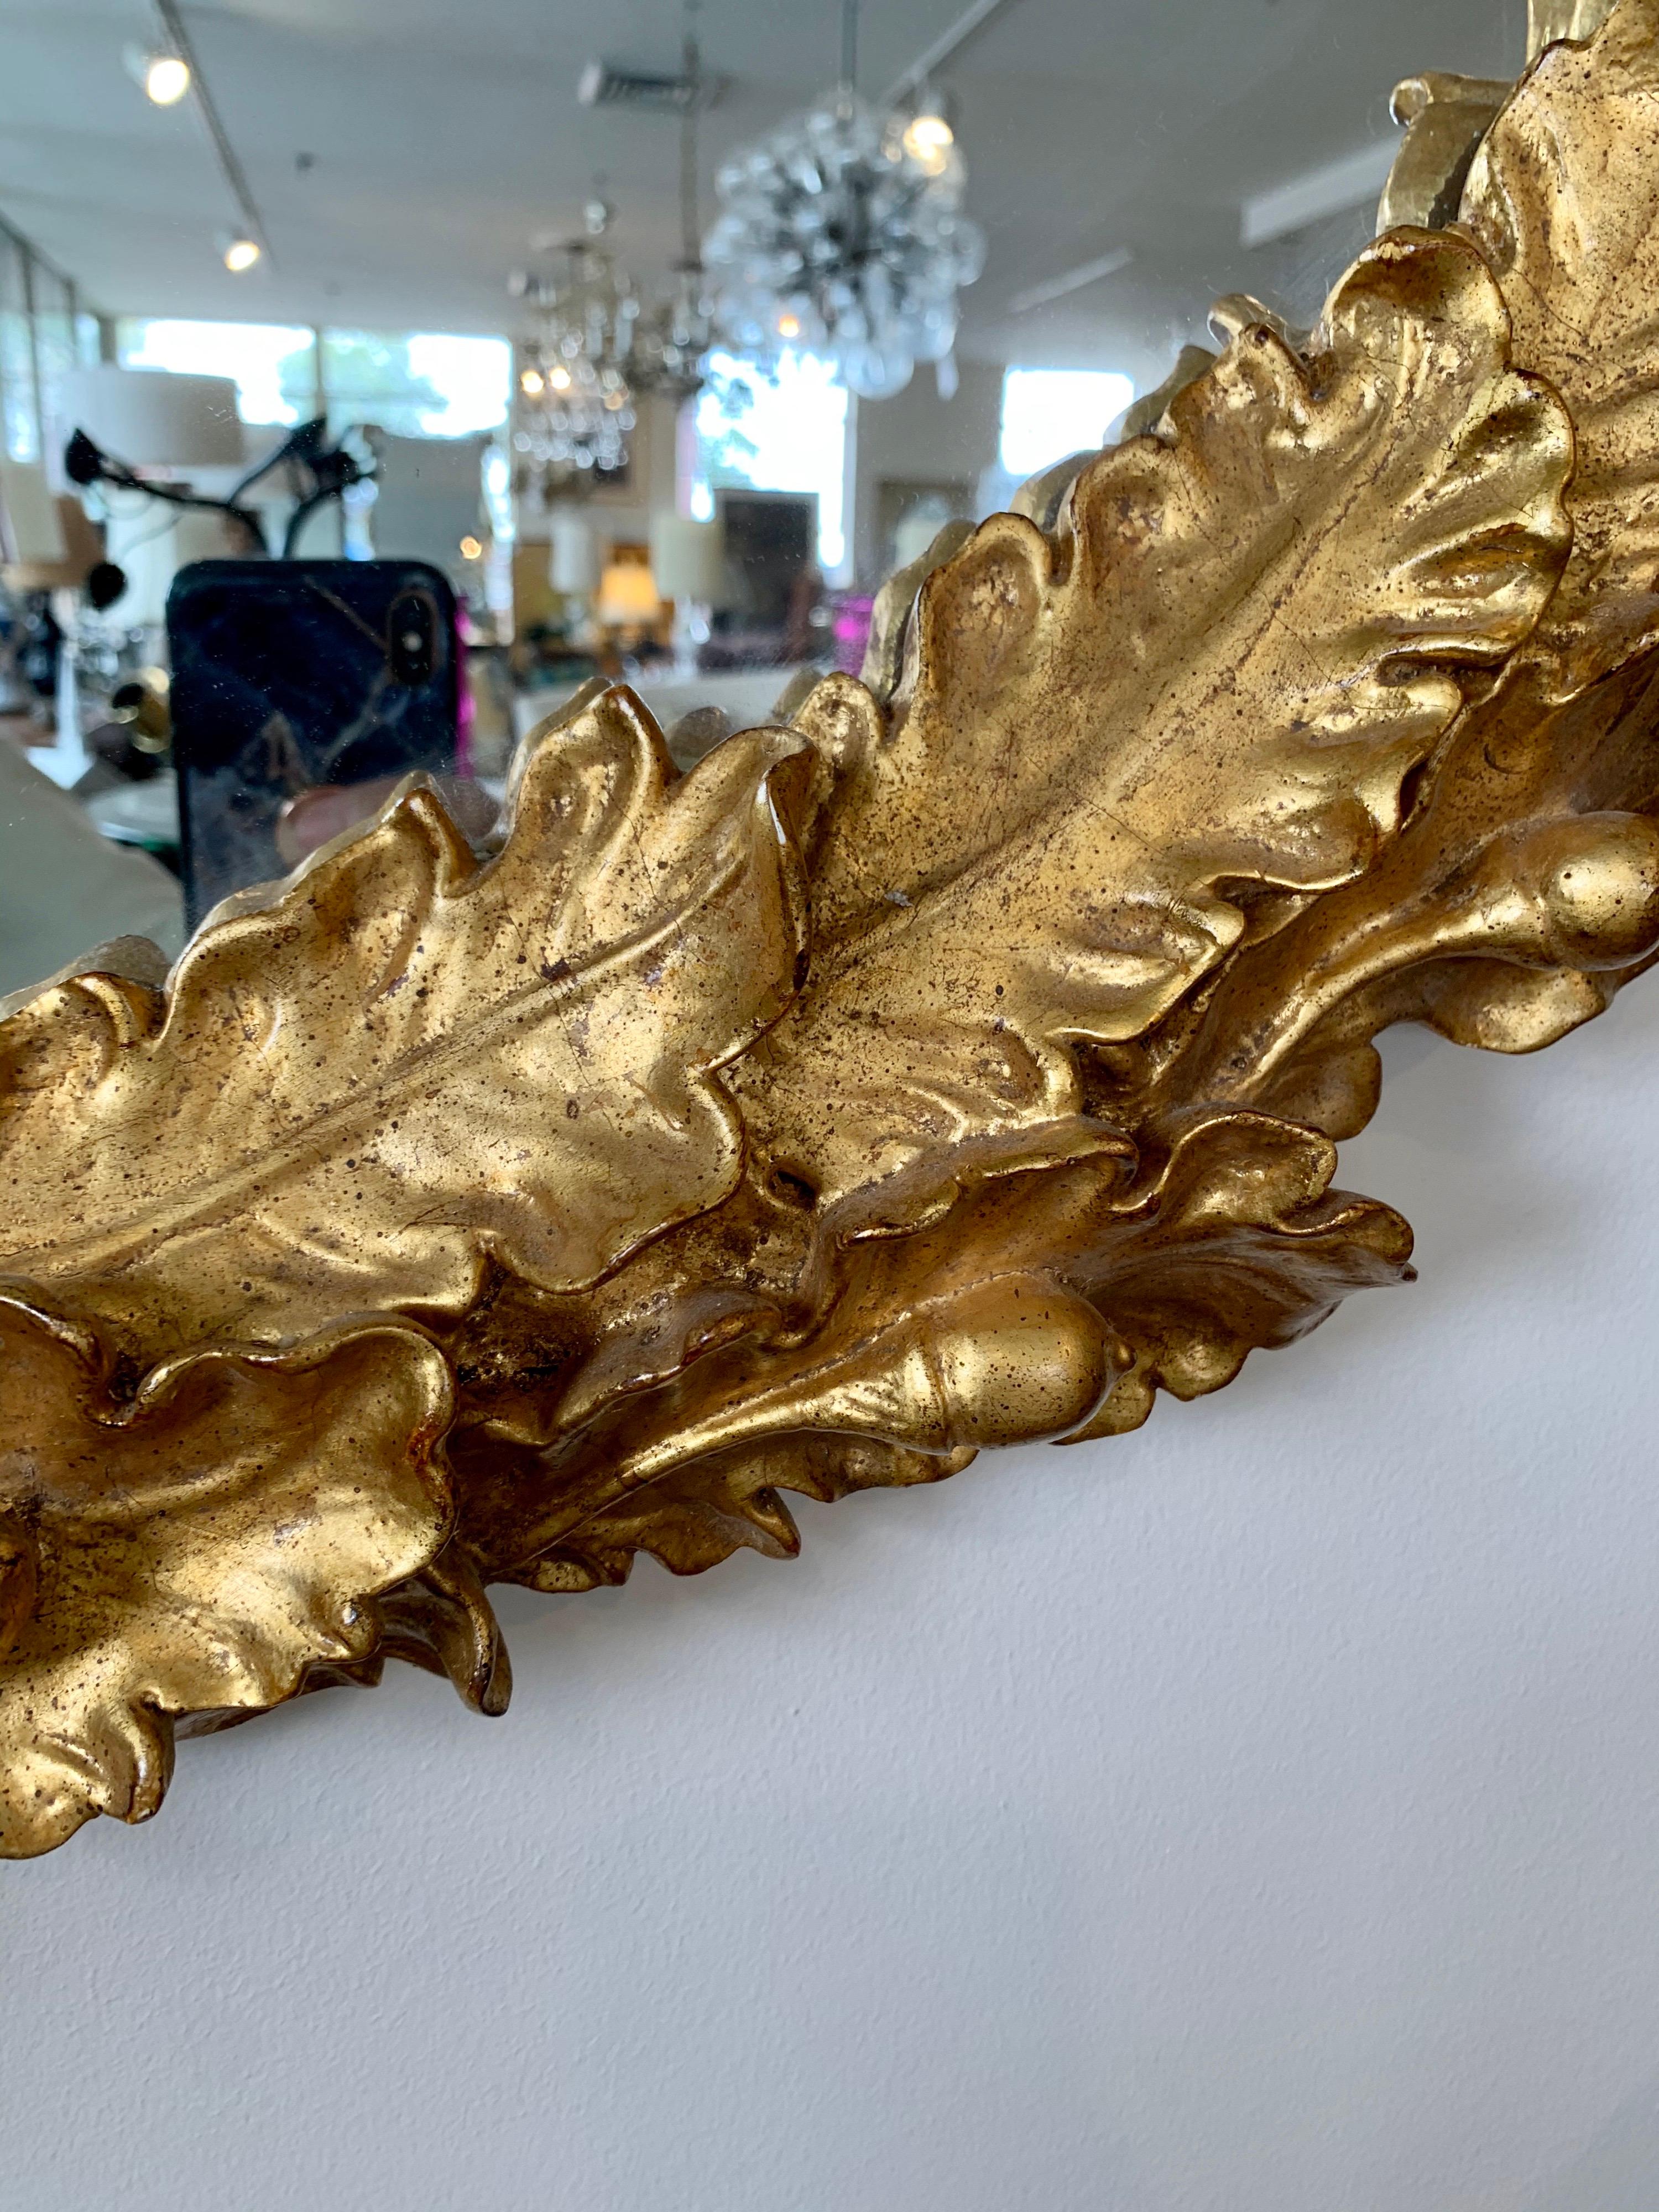 Magnificent large intricately carved gold giltwood Louis XVI oval mirror measures 4ft. X 3 ft. and features carved giltwood oak leaves and acorns.